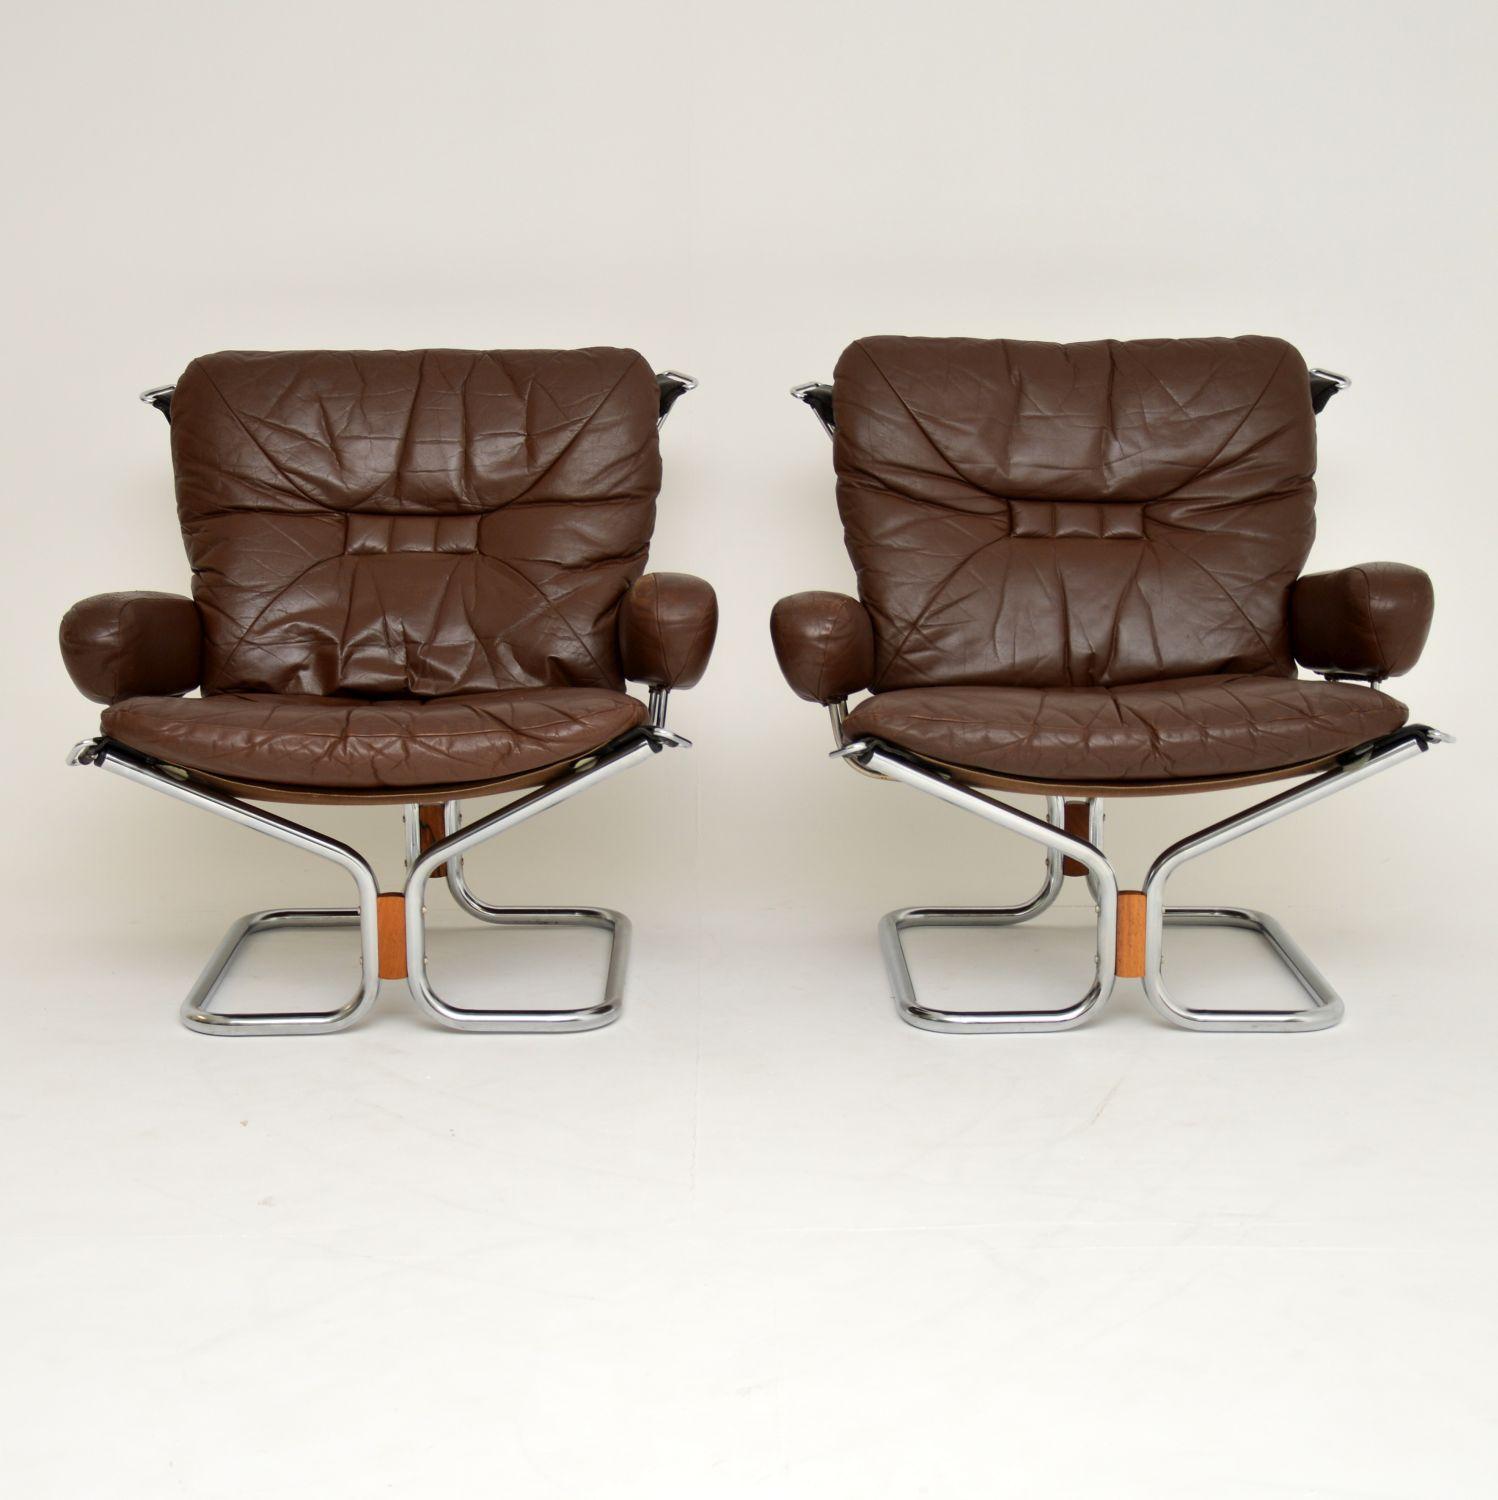 A stunning pair of vintage armchairs in leather, chrome and wood. These were designed by Ingmar Relling, they were made in Norway. They date from the 1960s-1970s, and are in lovely original condition. The leather has some minor surface wear, mostly